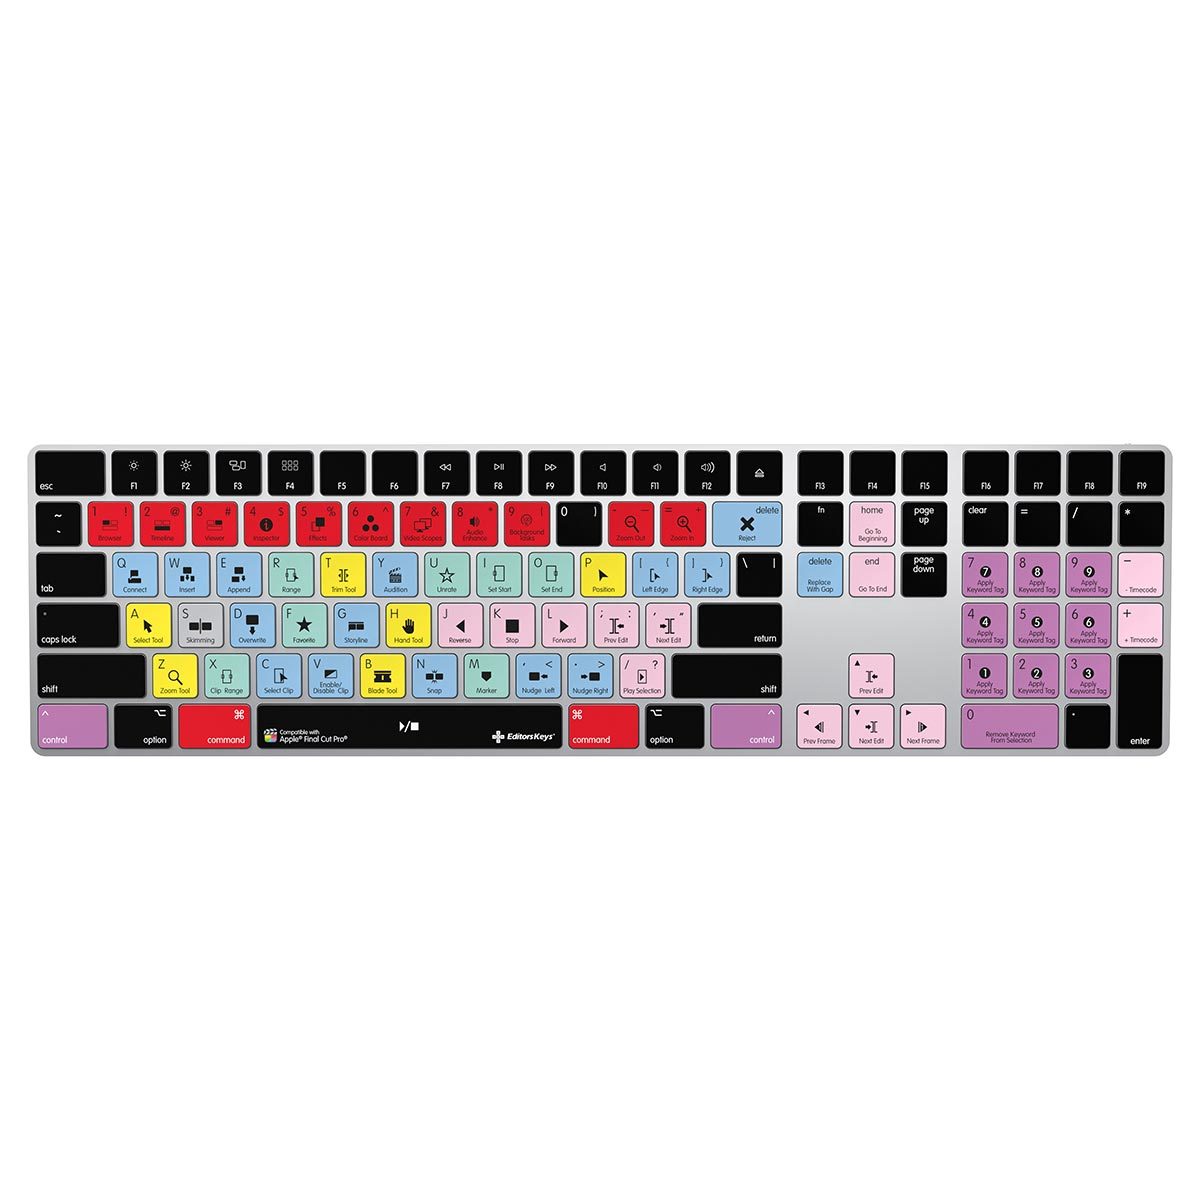 Genuine Apple Keyboard Customised by Editors Keys for Final cut Pro  USA Layout top down